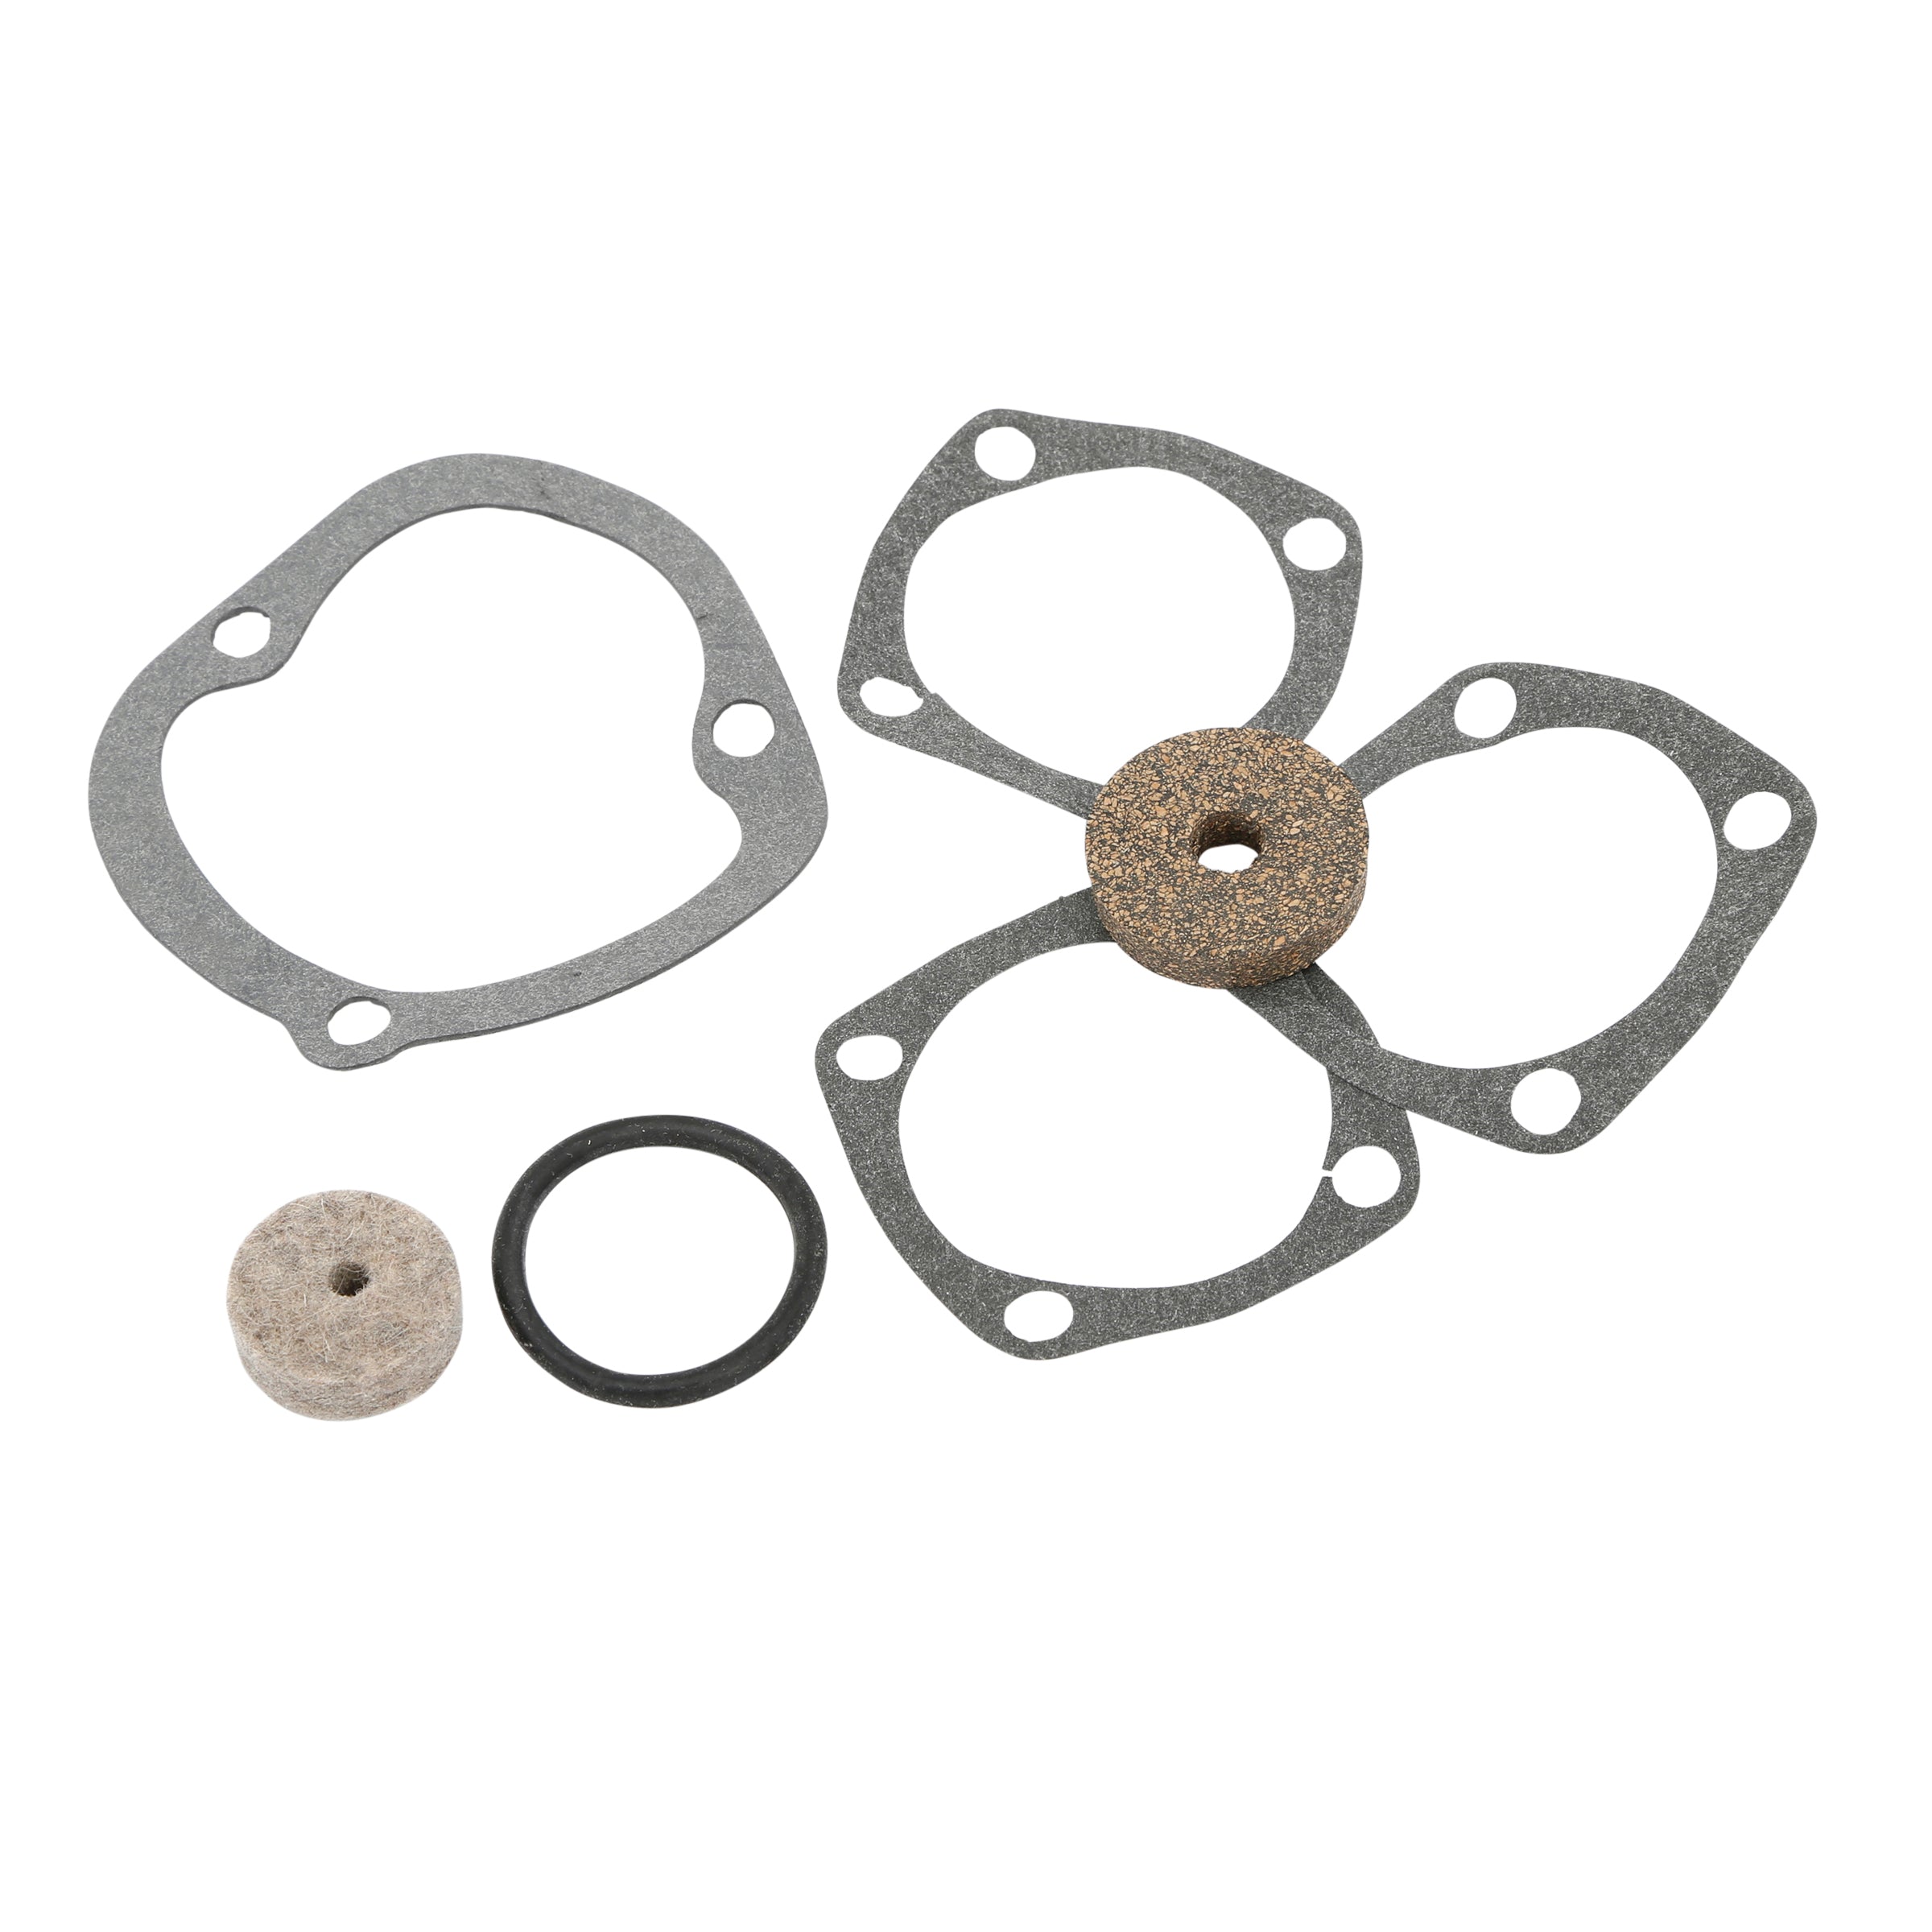 Steering Box Gasket Set (7 Tooth) • 1928- Early 30 Model A Ford